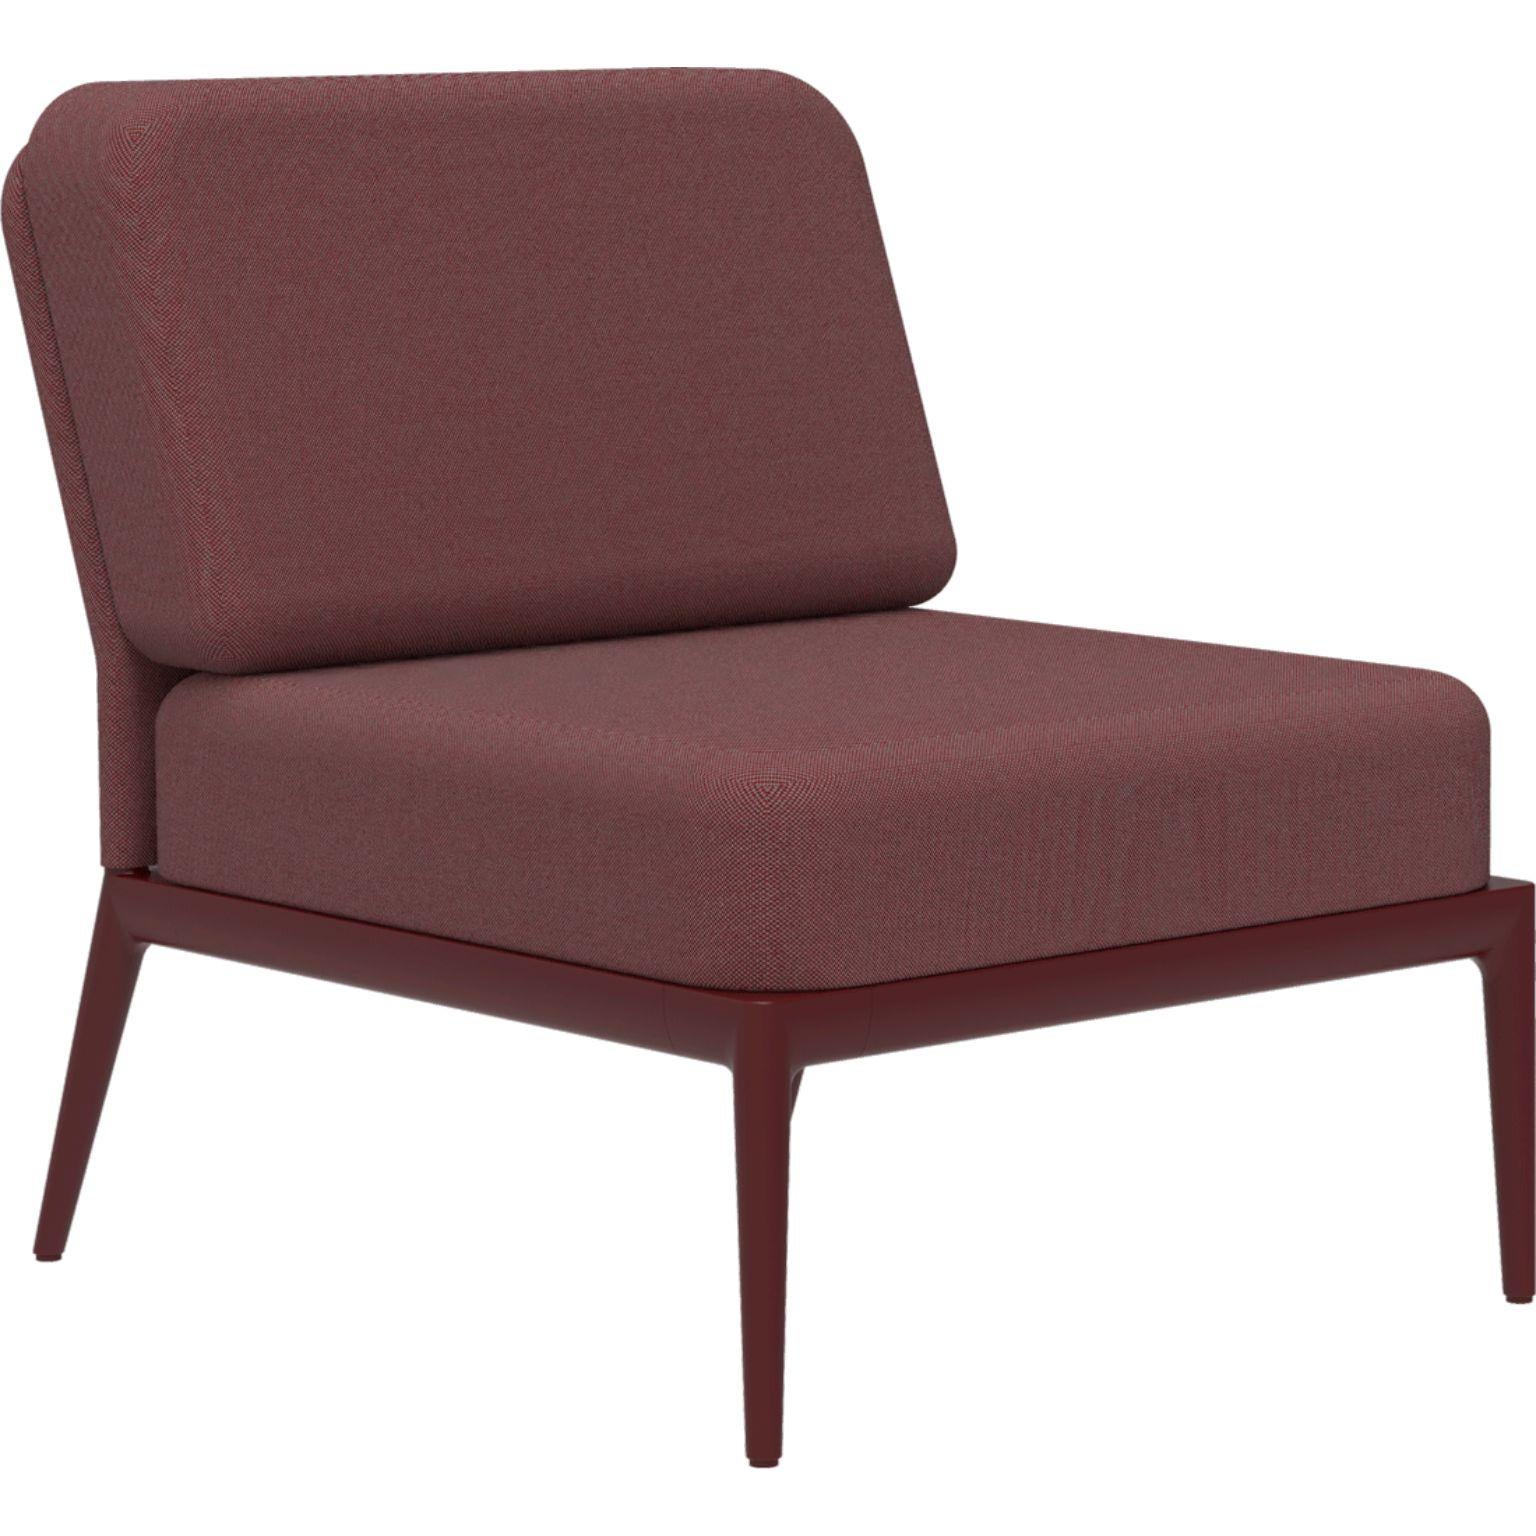 Cover Burgundy Central modular sofa by MOWEE
Dimensions: D83 x W68 x H81 cm (seat height 42 cm).
Material: Aluminum and upholstery.
Weight: 17 kg.
Also available in different colors and finishes. 

An unmistakable collection for its beauty and